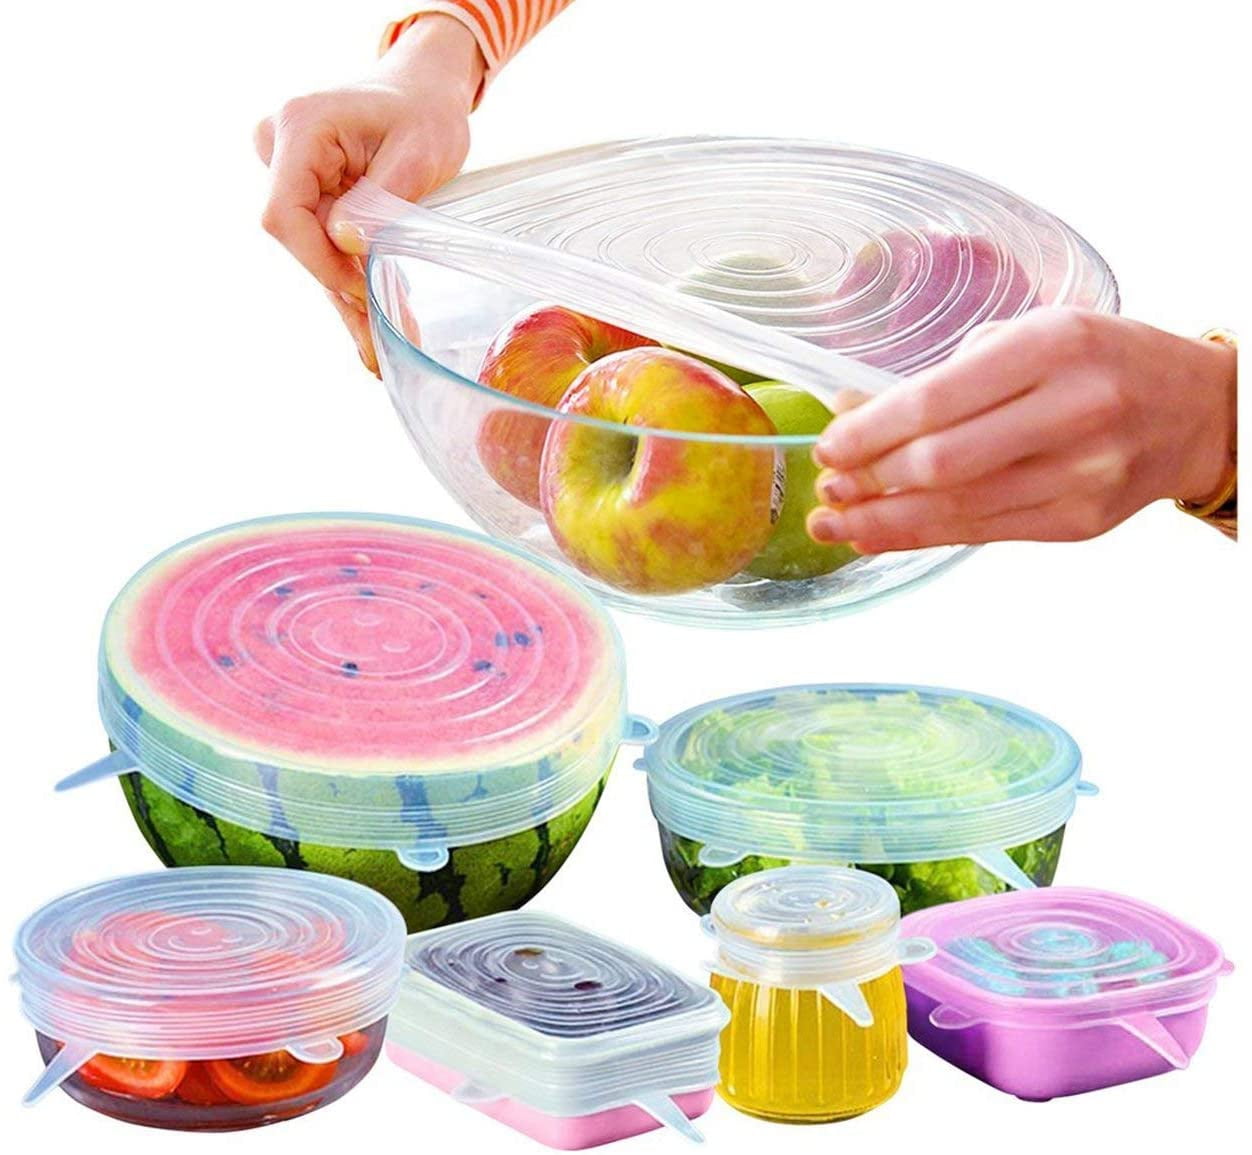 Silicone Stretch Lids 6-Pack Various Sizes fit snugly over Bowl-Cam-Cup-Jar-Mug 